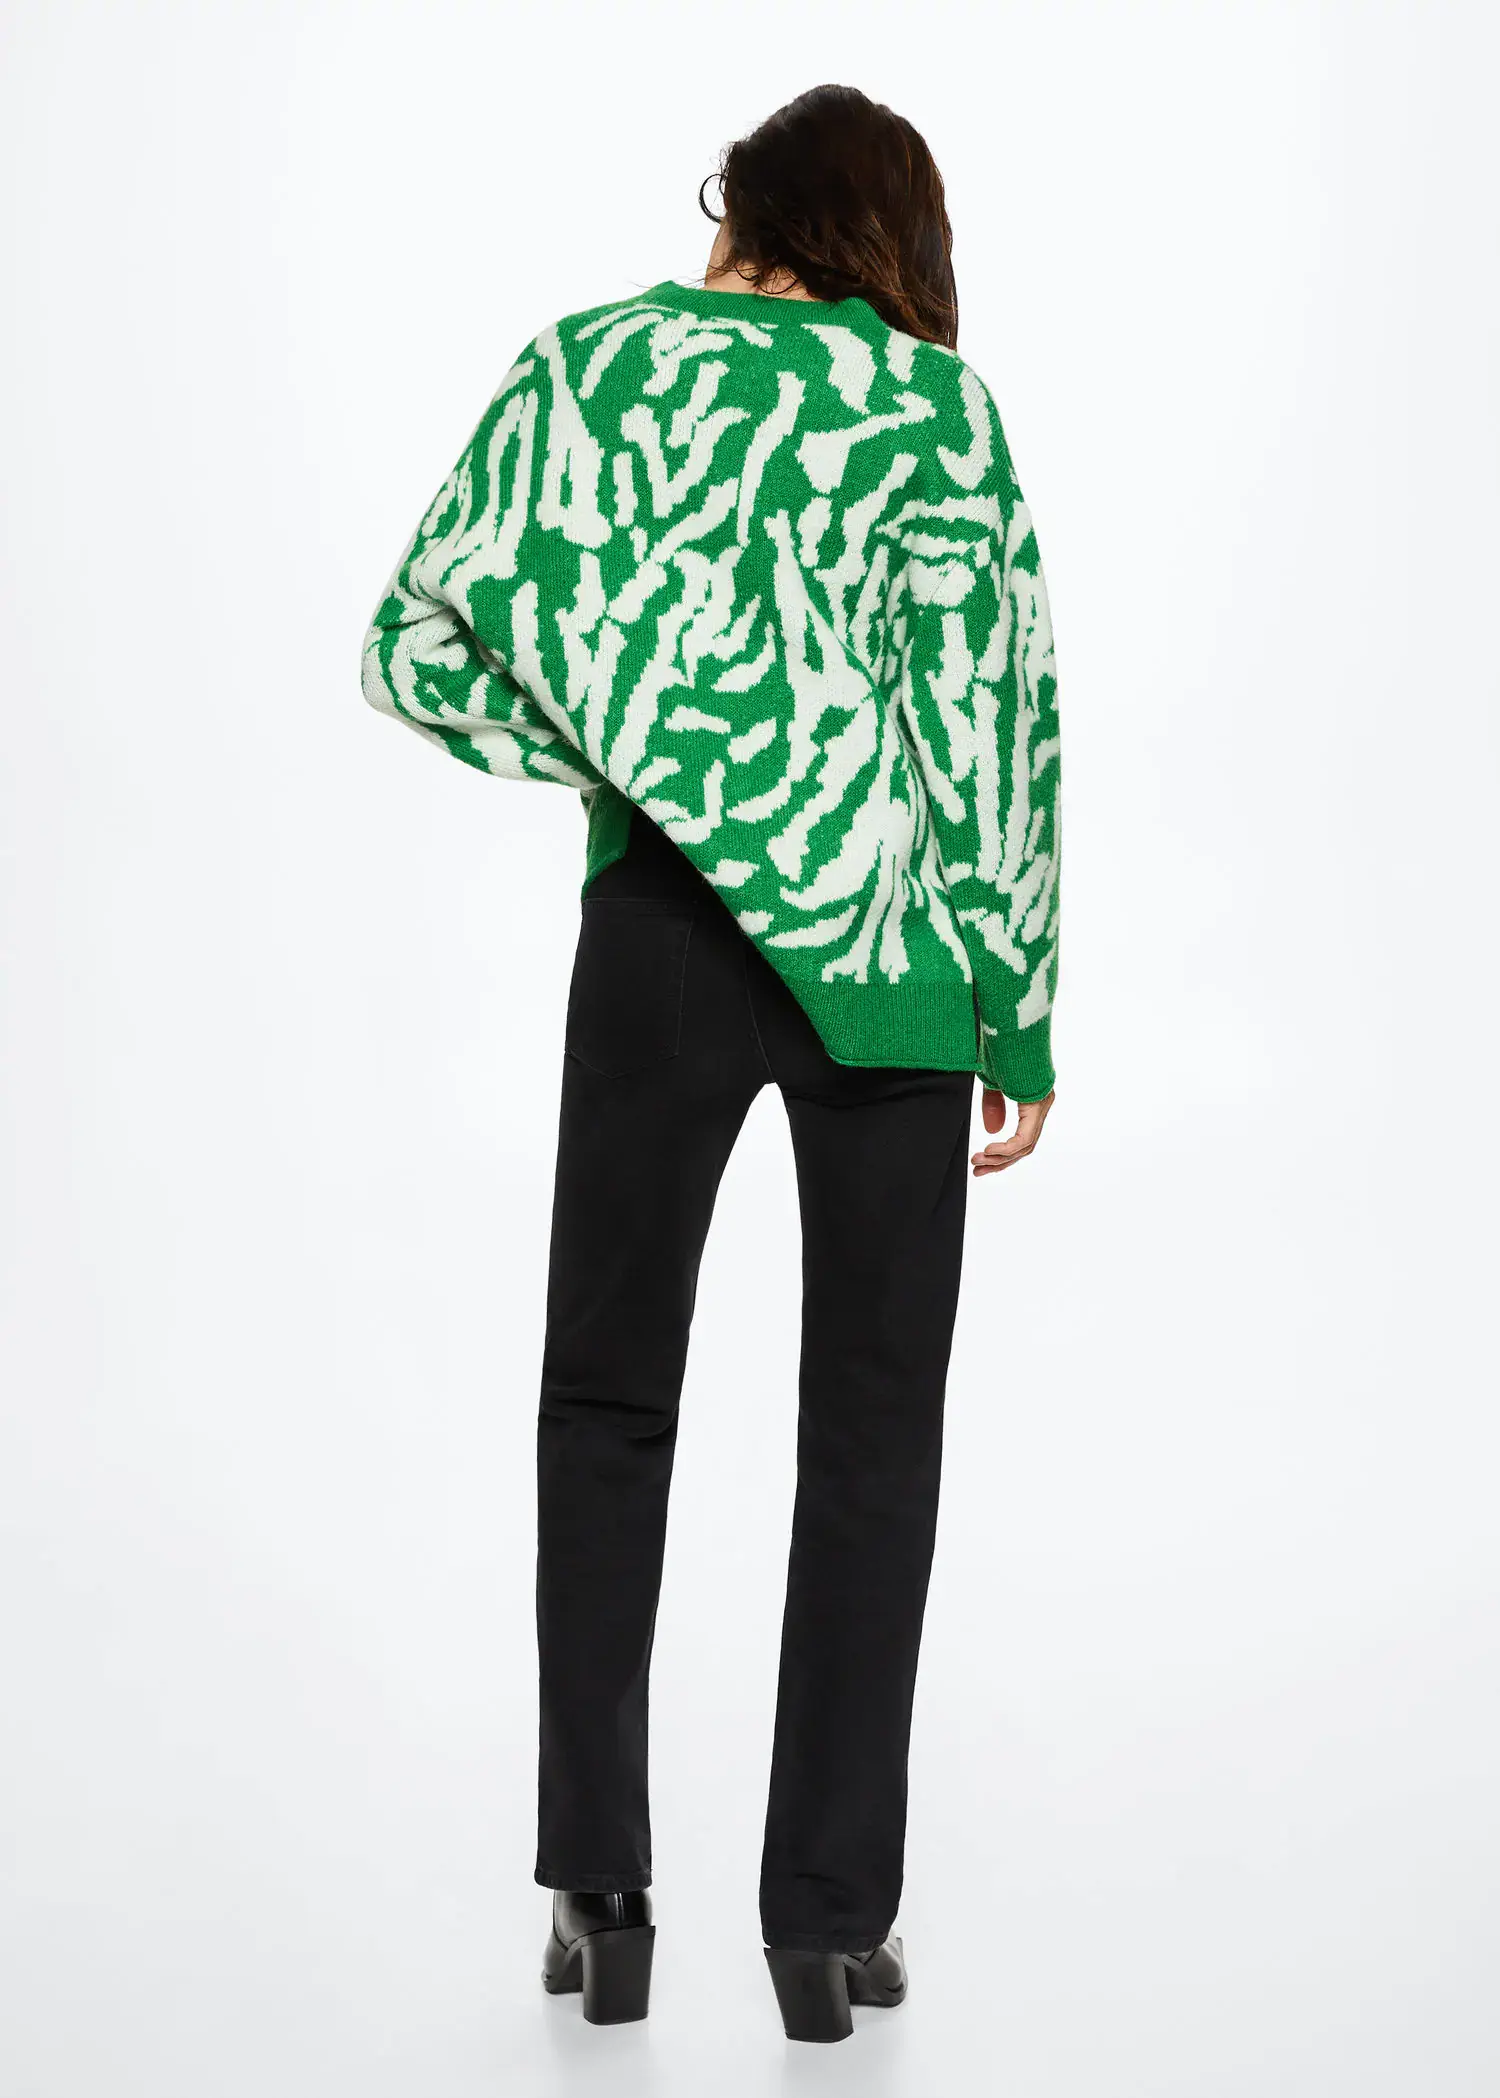 Mango Animal-print knitted sweater. a person wearing a green and white sweater. 